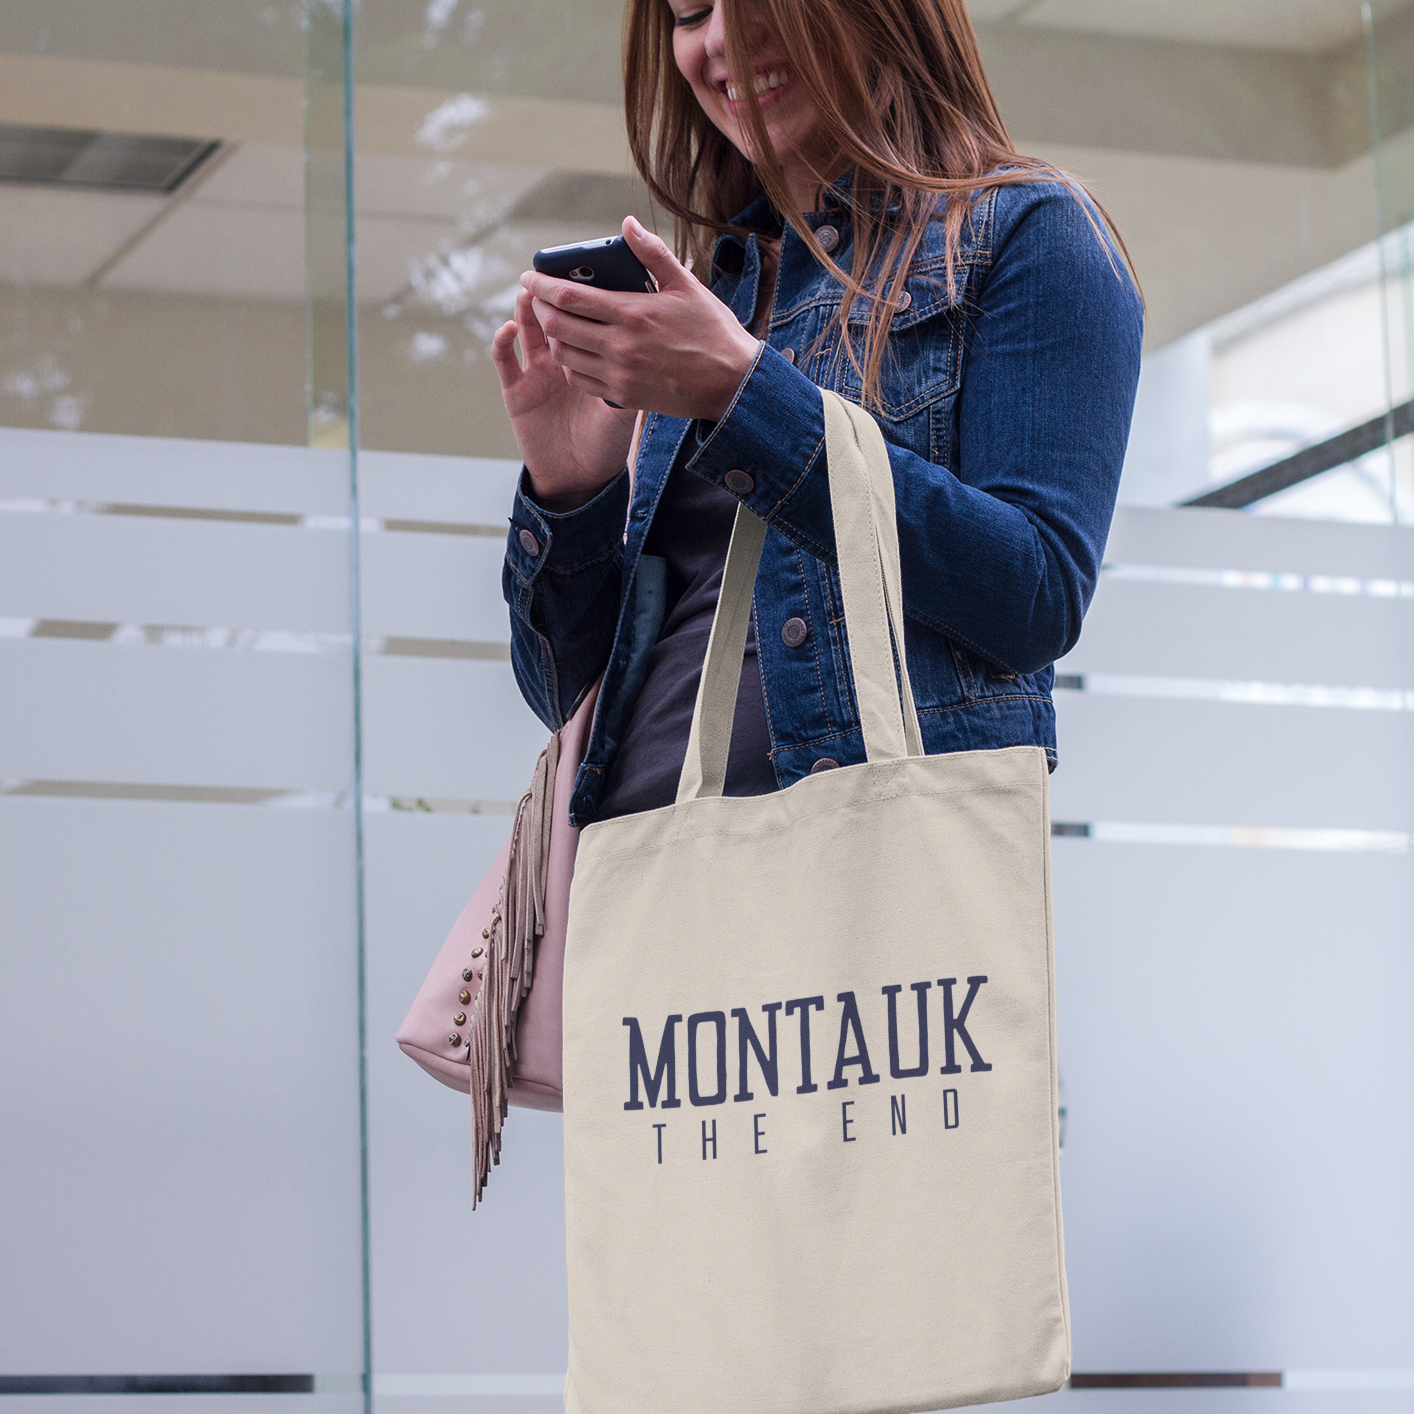 Montauk 'The End' Tote Bag - Durable 100% Cotton Canvas, Perfect for Everyday Use